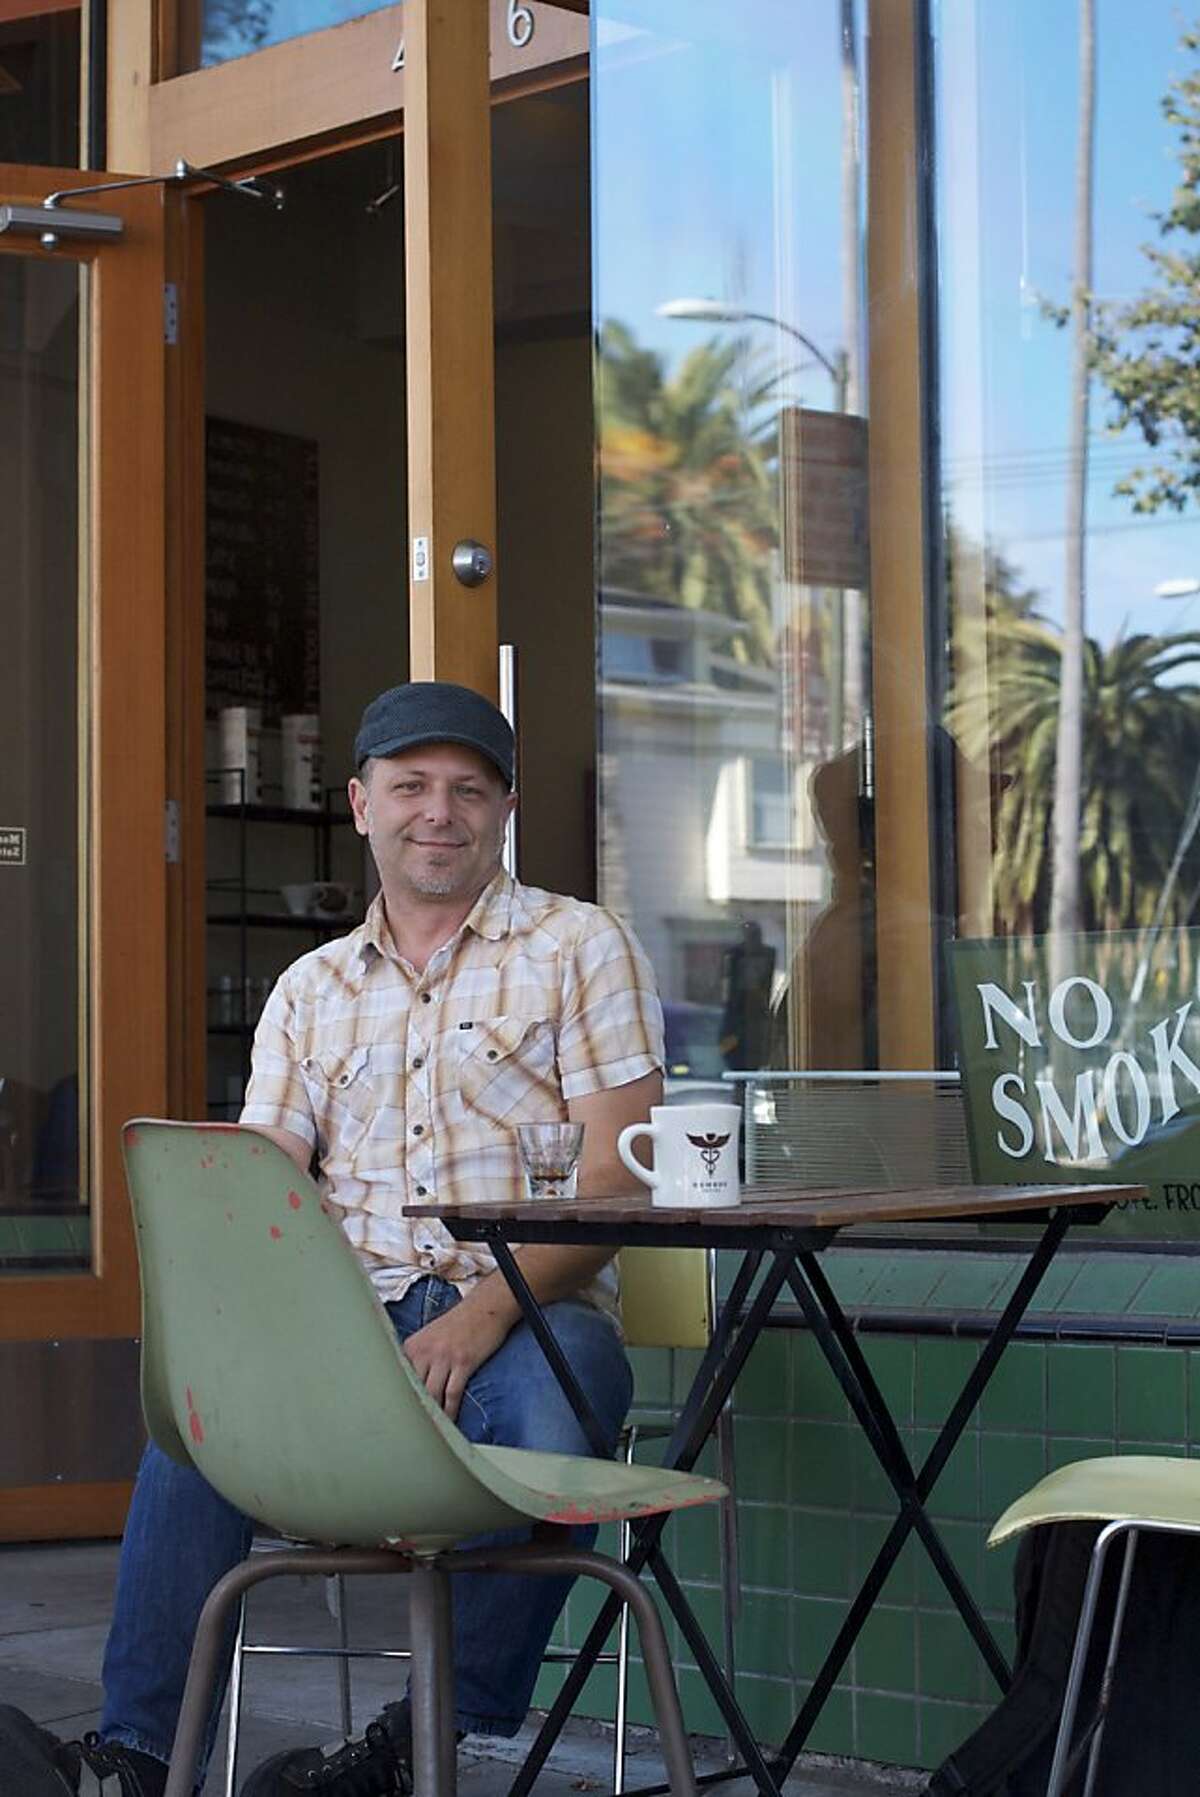 Todd Spitzer, owner of Remedy cafe in Oakland, used loans from community investors to expand to a new location in 2011.